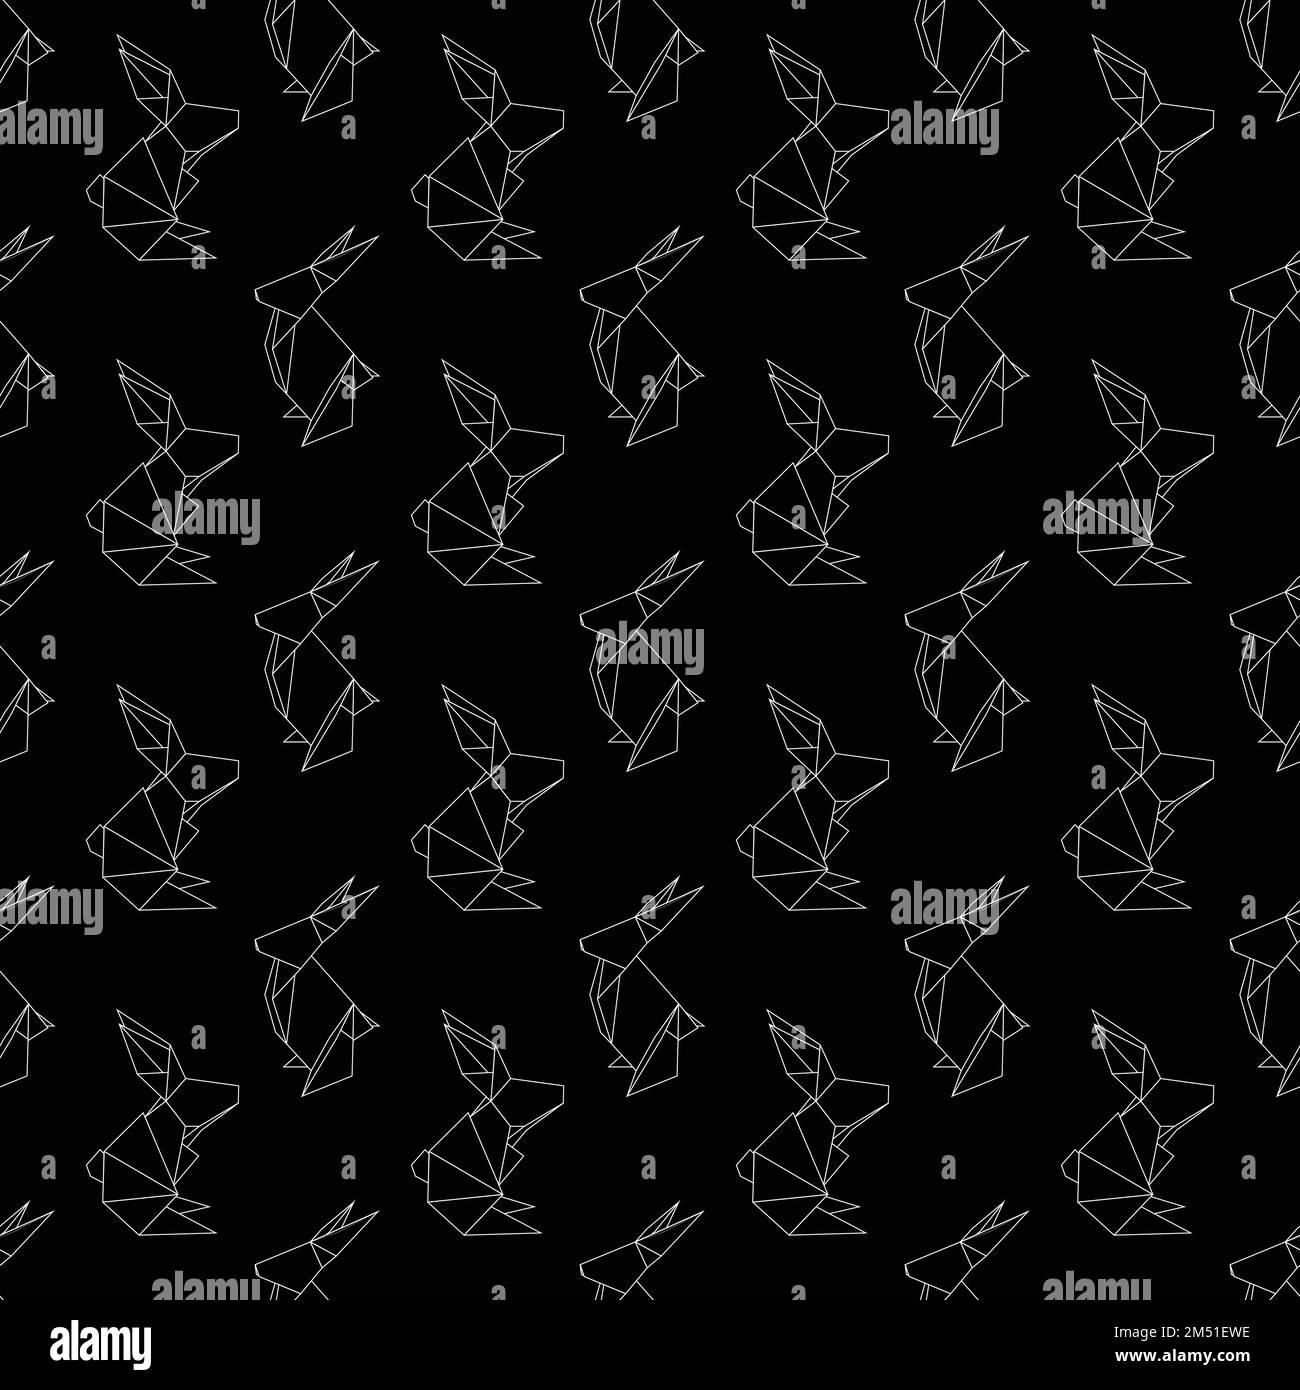 Seamless pattern with contour origami rabbits on black background. Symbol of Chinese of New year. Vector texture with outline polygonal hares. Paper Stock Vector